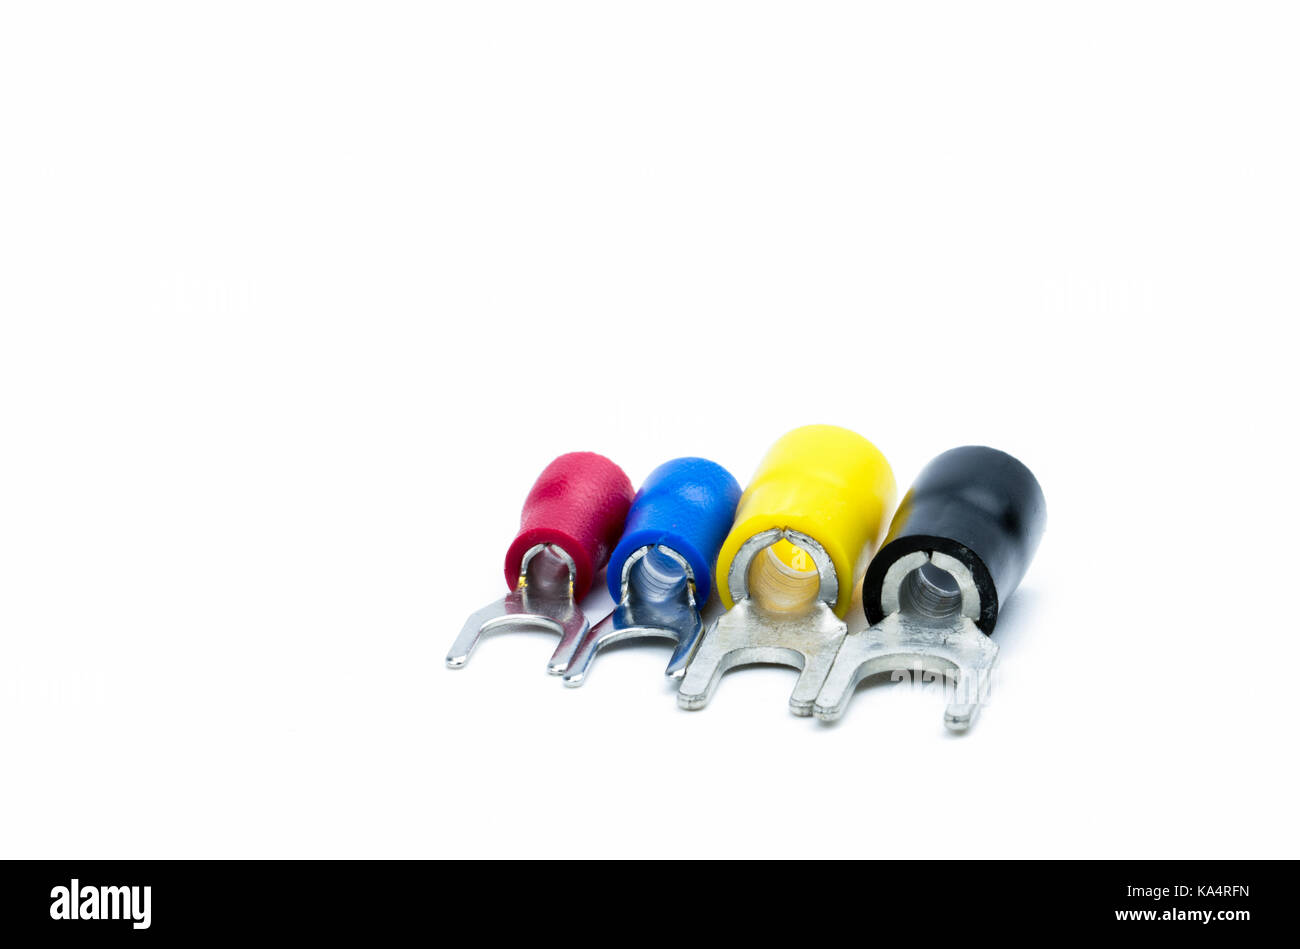 Red, blue, yellow and black color of spade terminals electrical cable connector accessories isolated on white background with clipping path Stock Photo